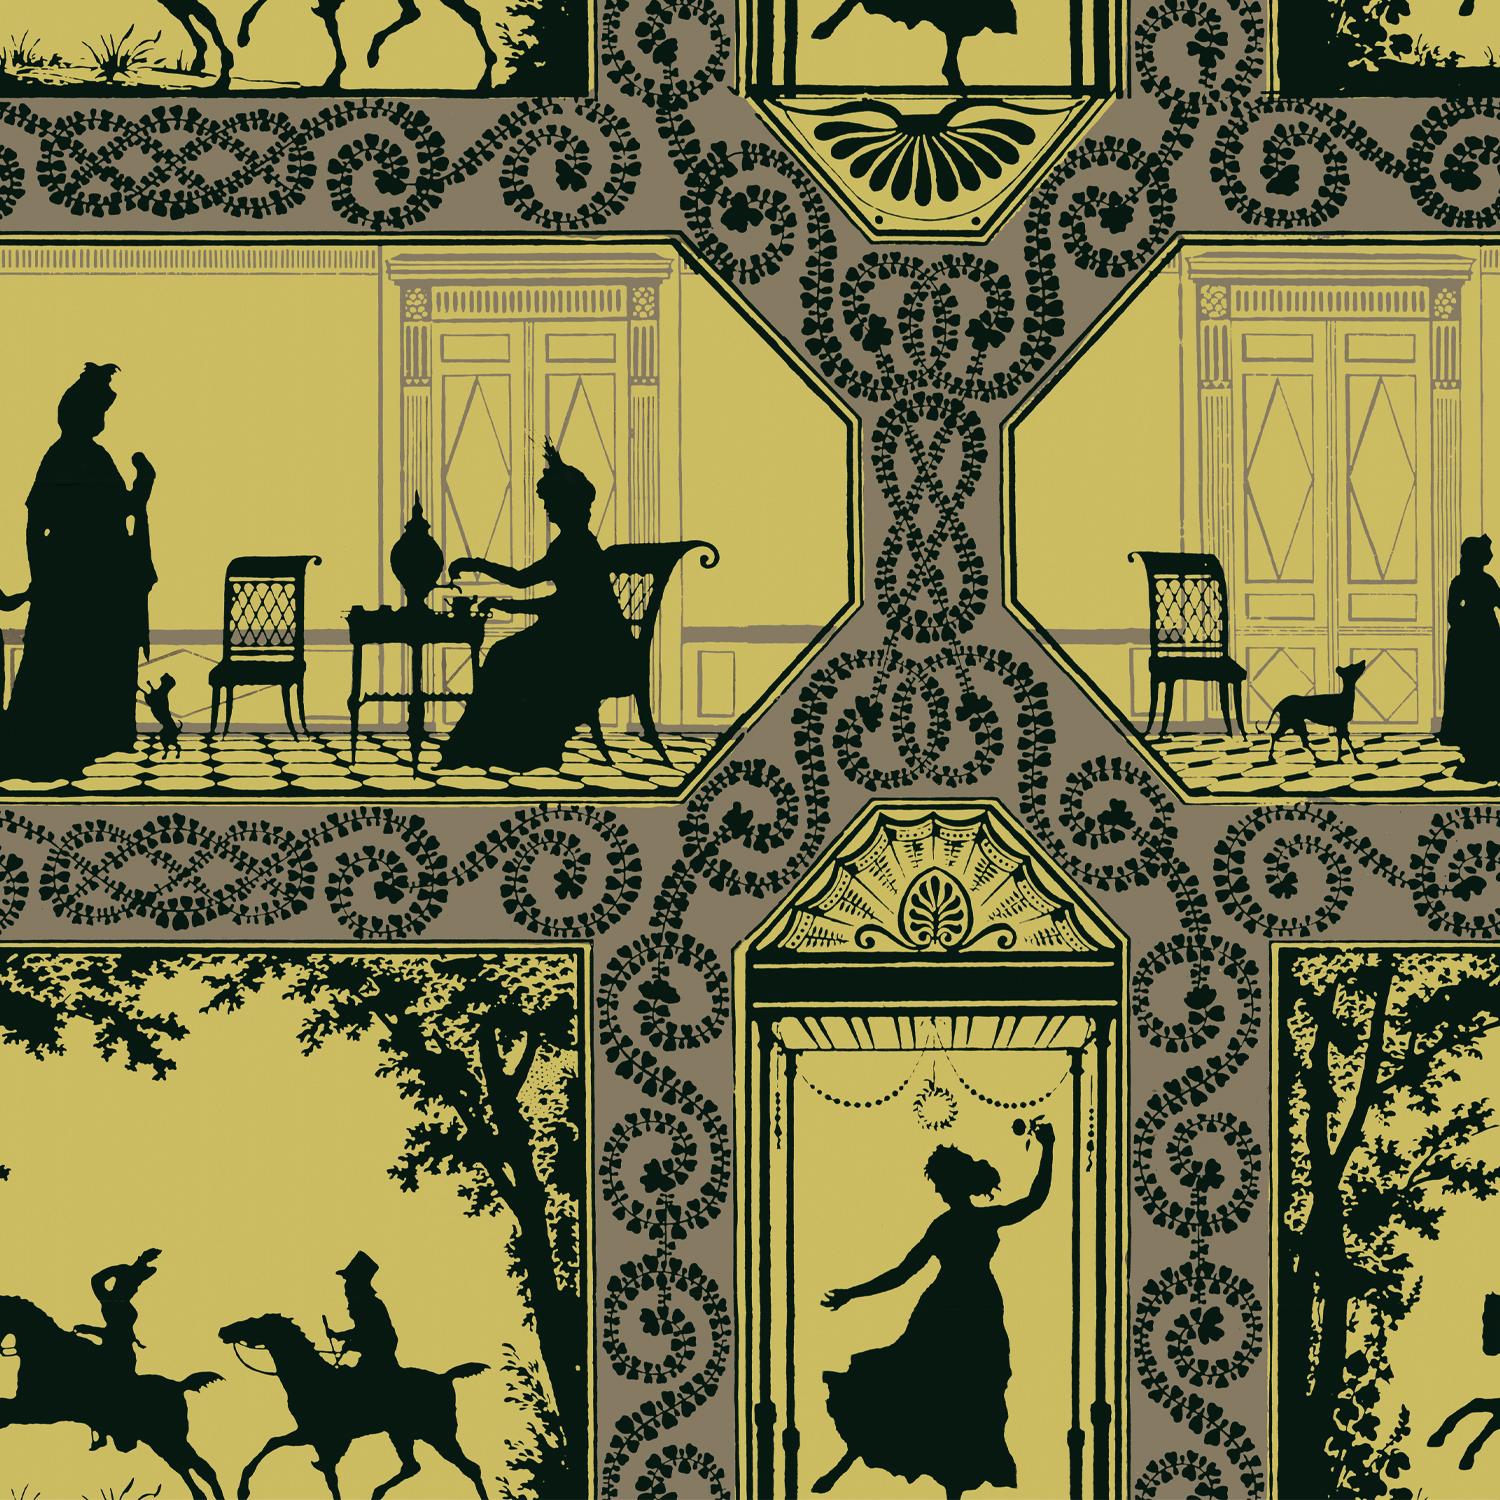 Repeat: 67,9 cm / 26.7 in

Founded in 2019, the French wallpaper brand Papier Francais is defined by the rediscovery, restoration, and revival of iconic wallpapers dating back to the French “Golden Age of wallpaper” of the 18th and 19th centuries.